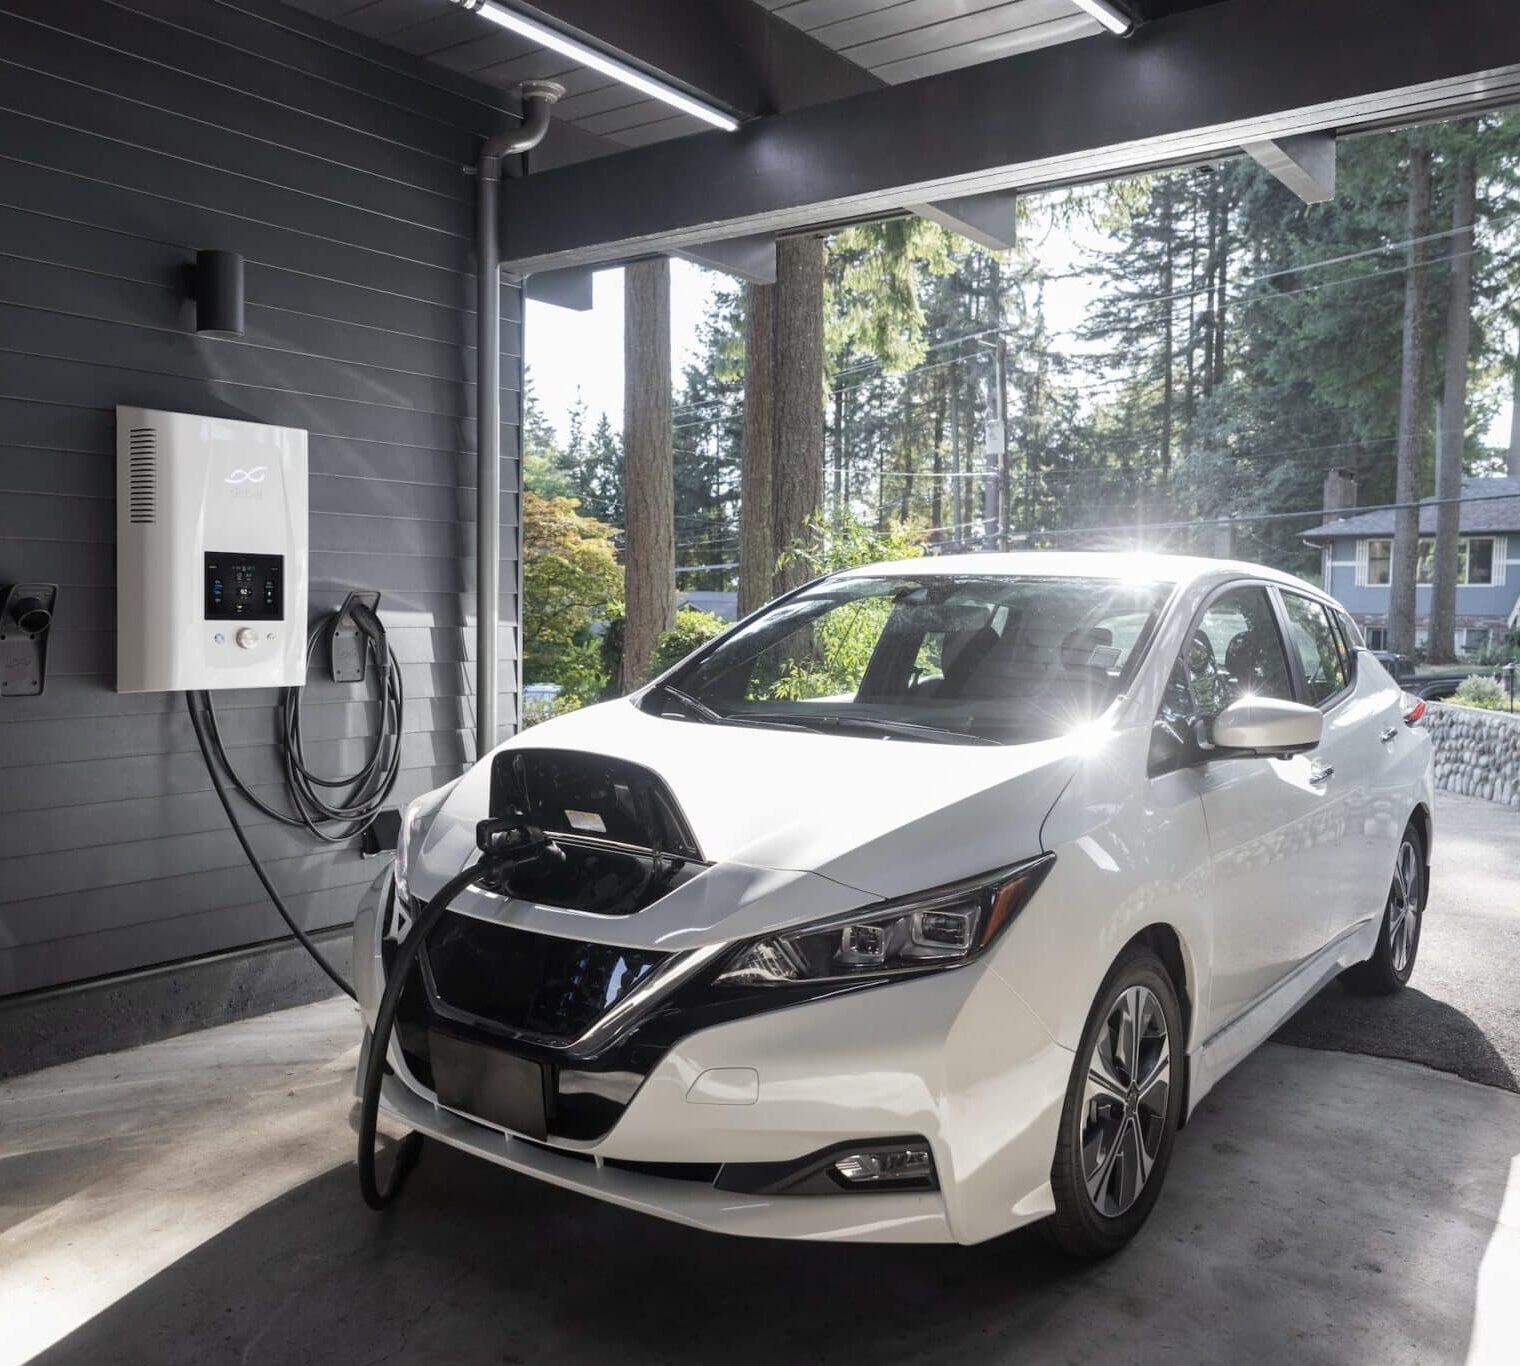 The Advantages of Having a Home Electric Vehicle Charging Station